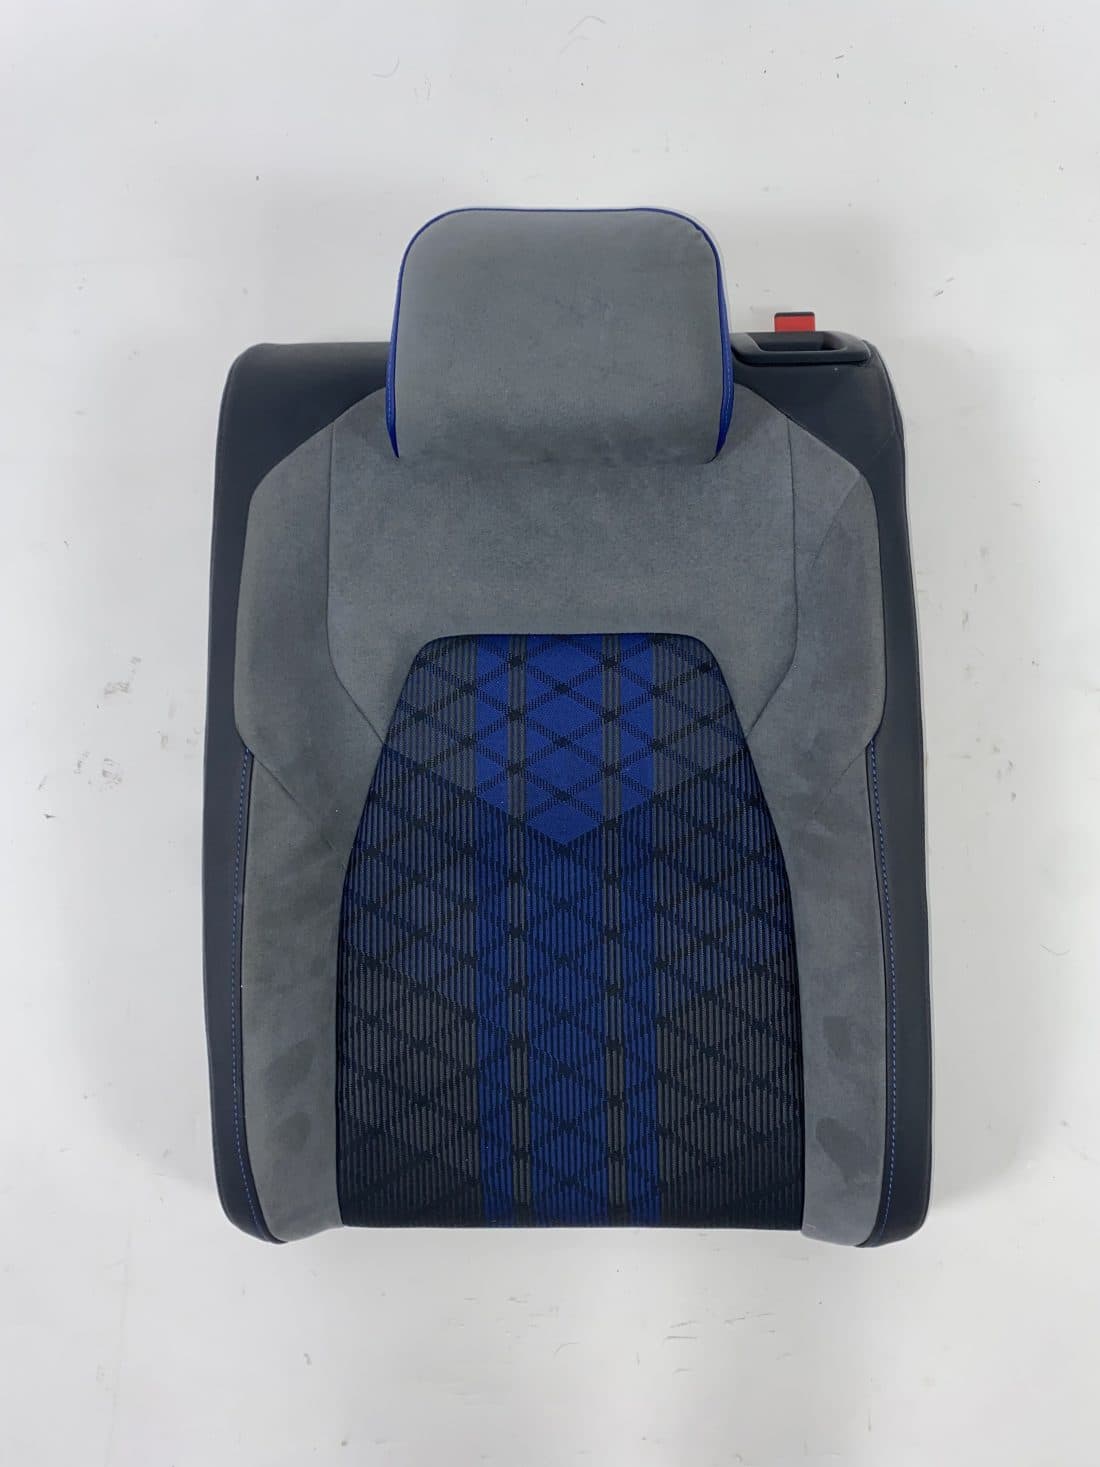 Trp Post Container Data Trp Post Id 13450 Interior Vw Golf 8 R Fabric Alcantara Leather Grey Blue Trp Post Container